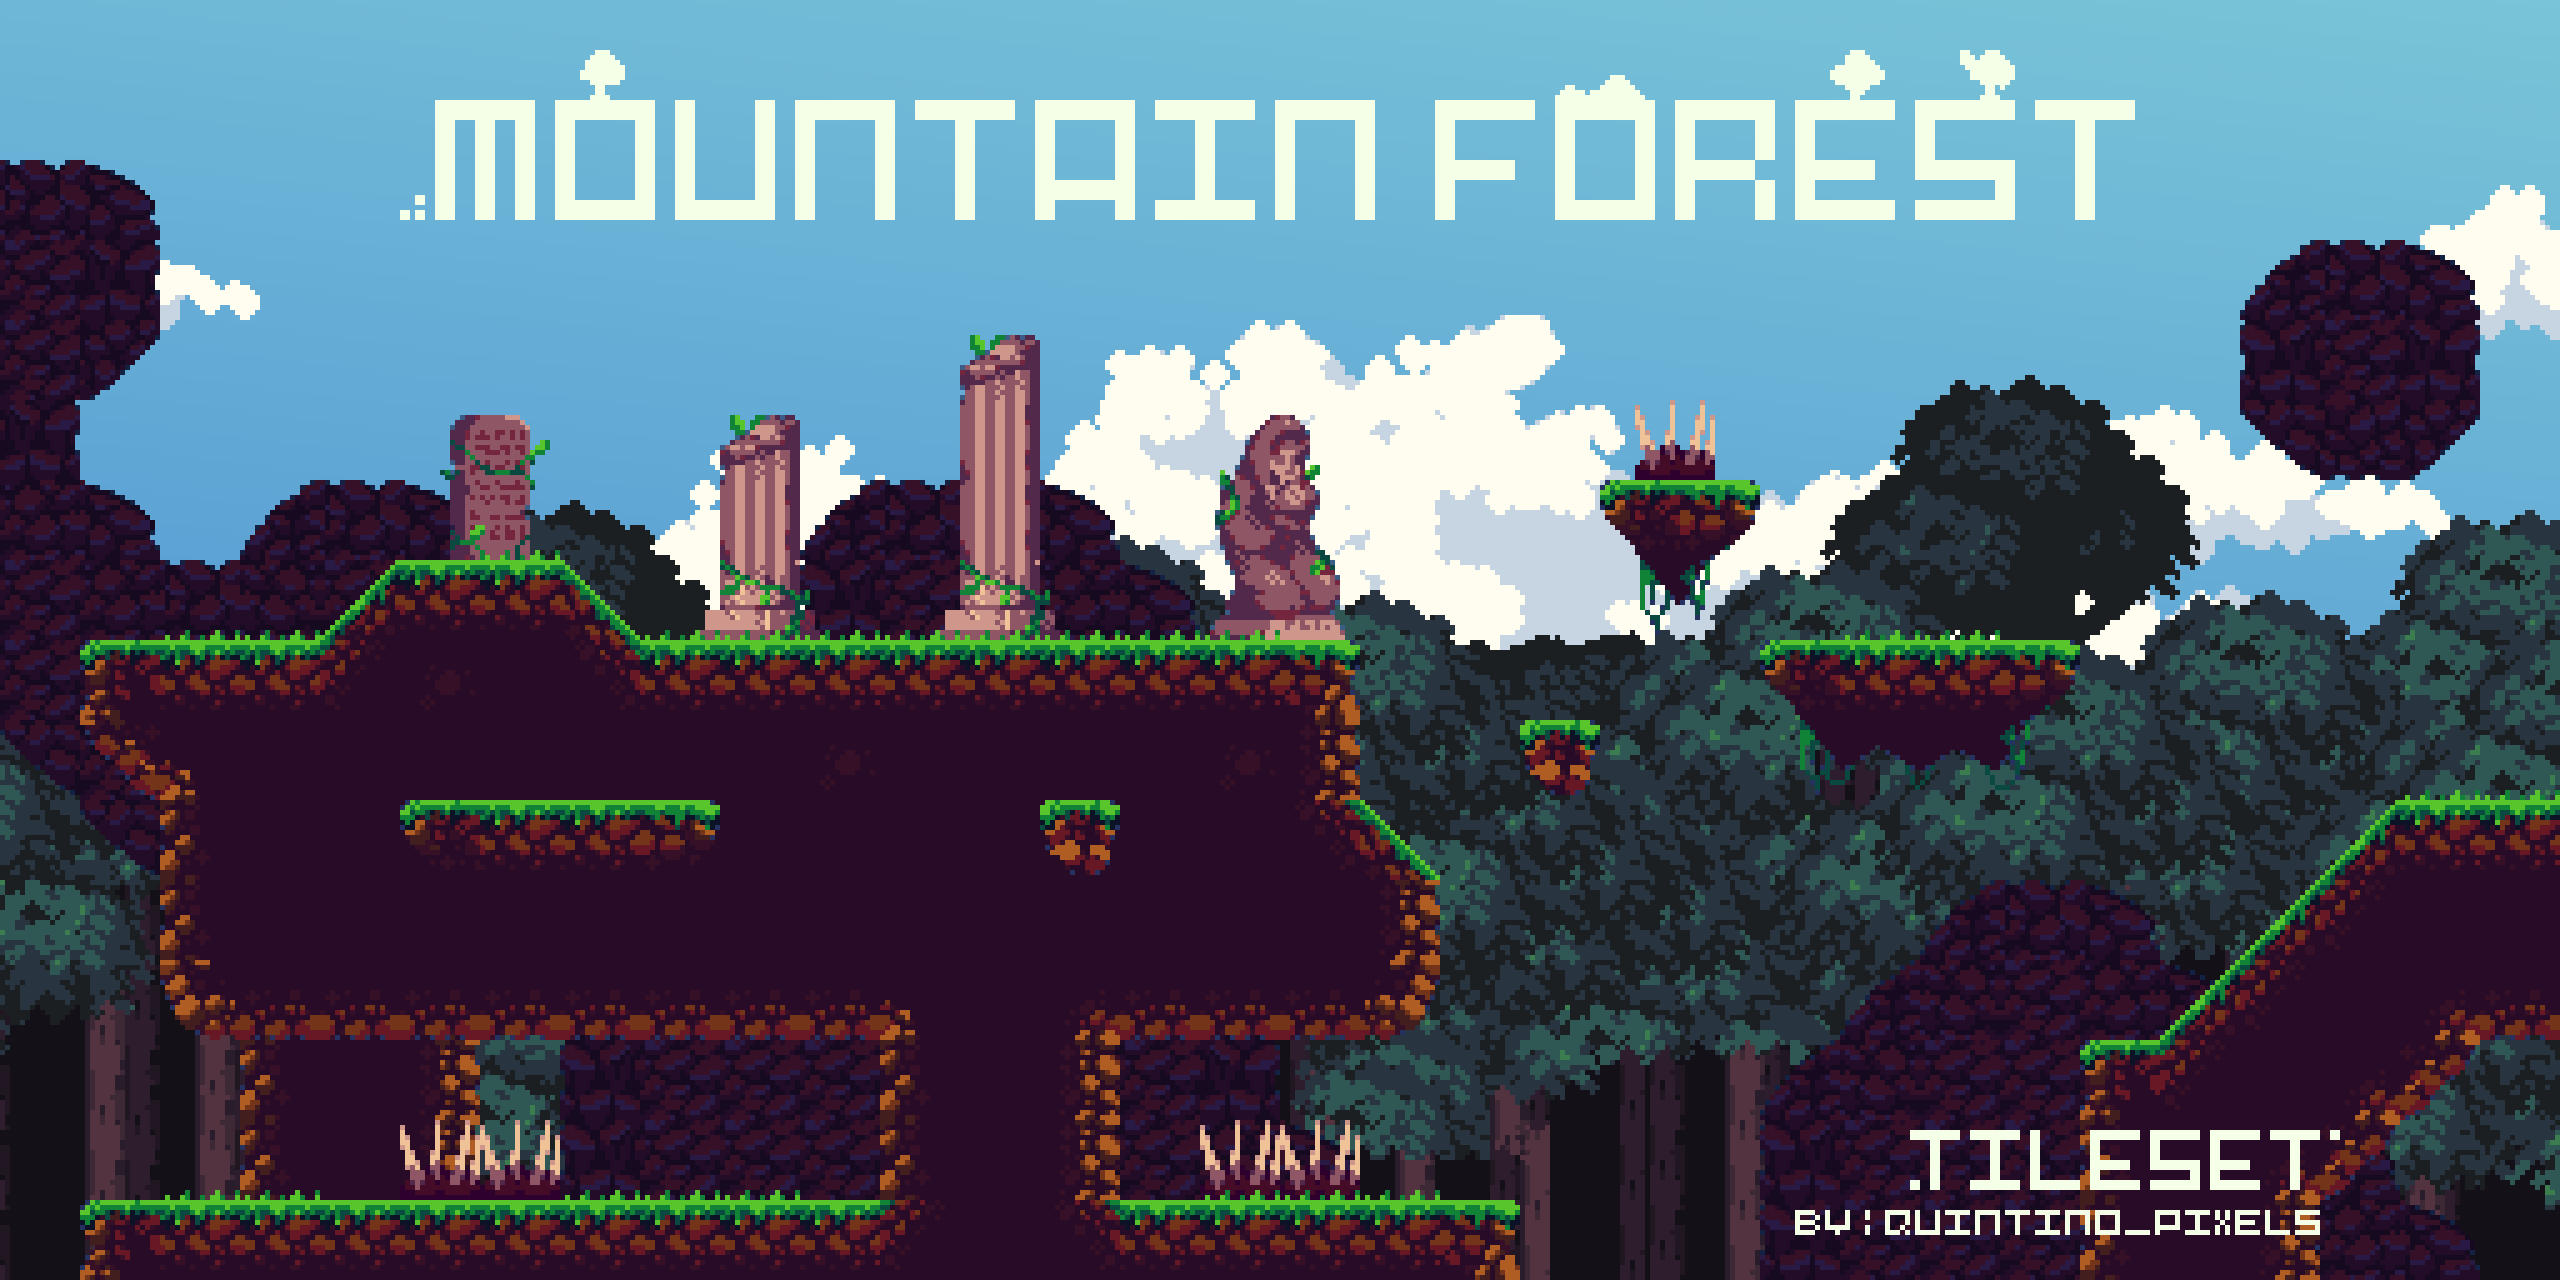 [CC 1.0] Mountain Forest